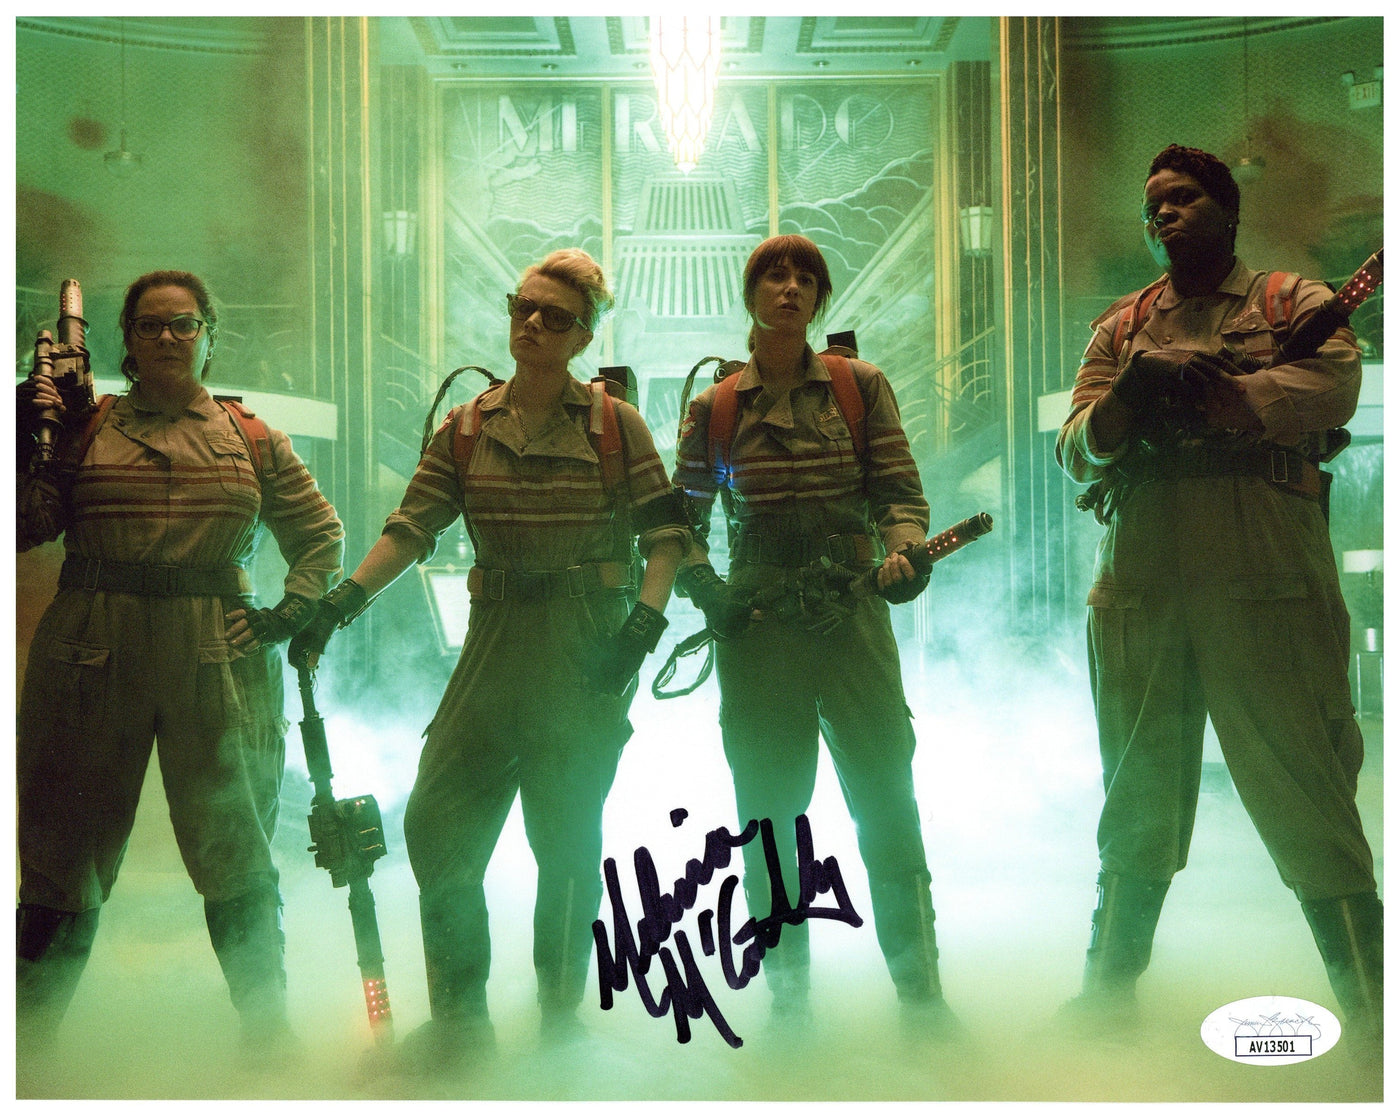 Melissa McCarthy Signed 8x10 Photo Ghostbusters Authentic Autographed JSA COA #3